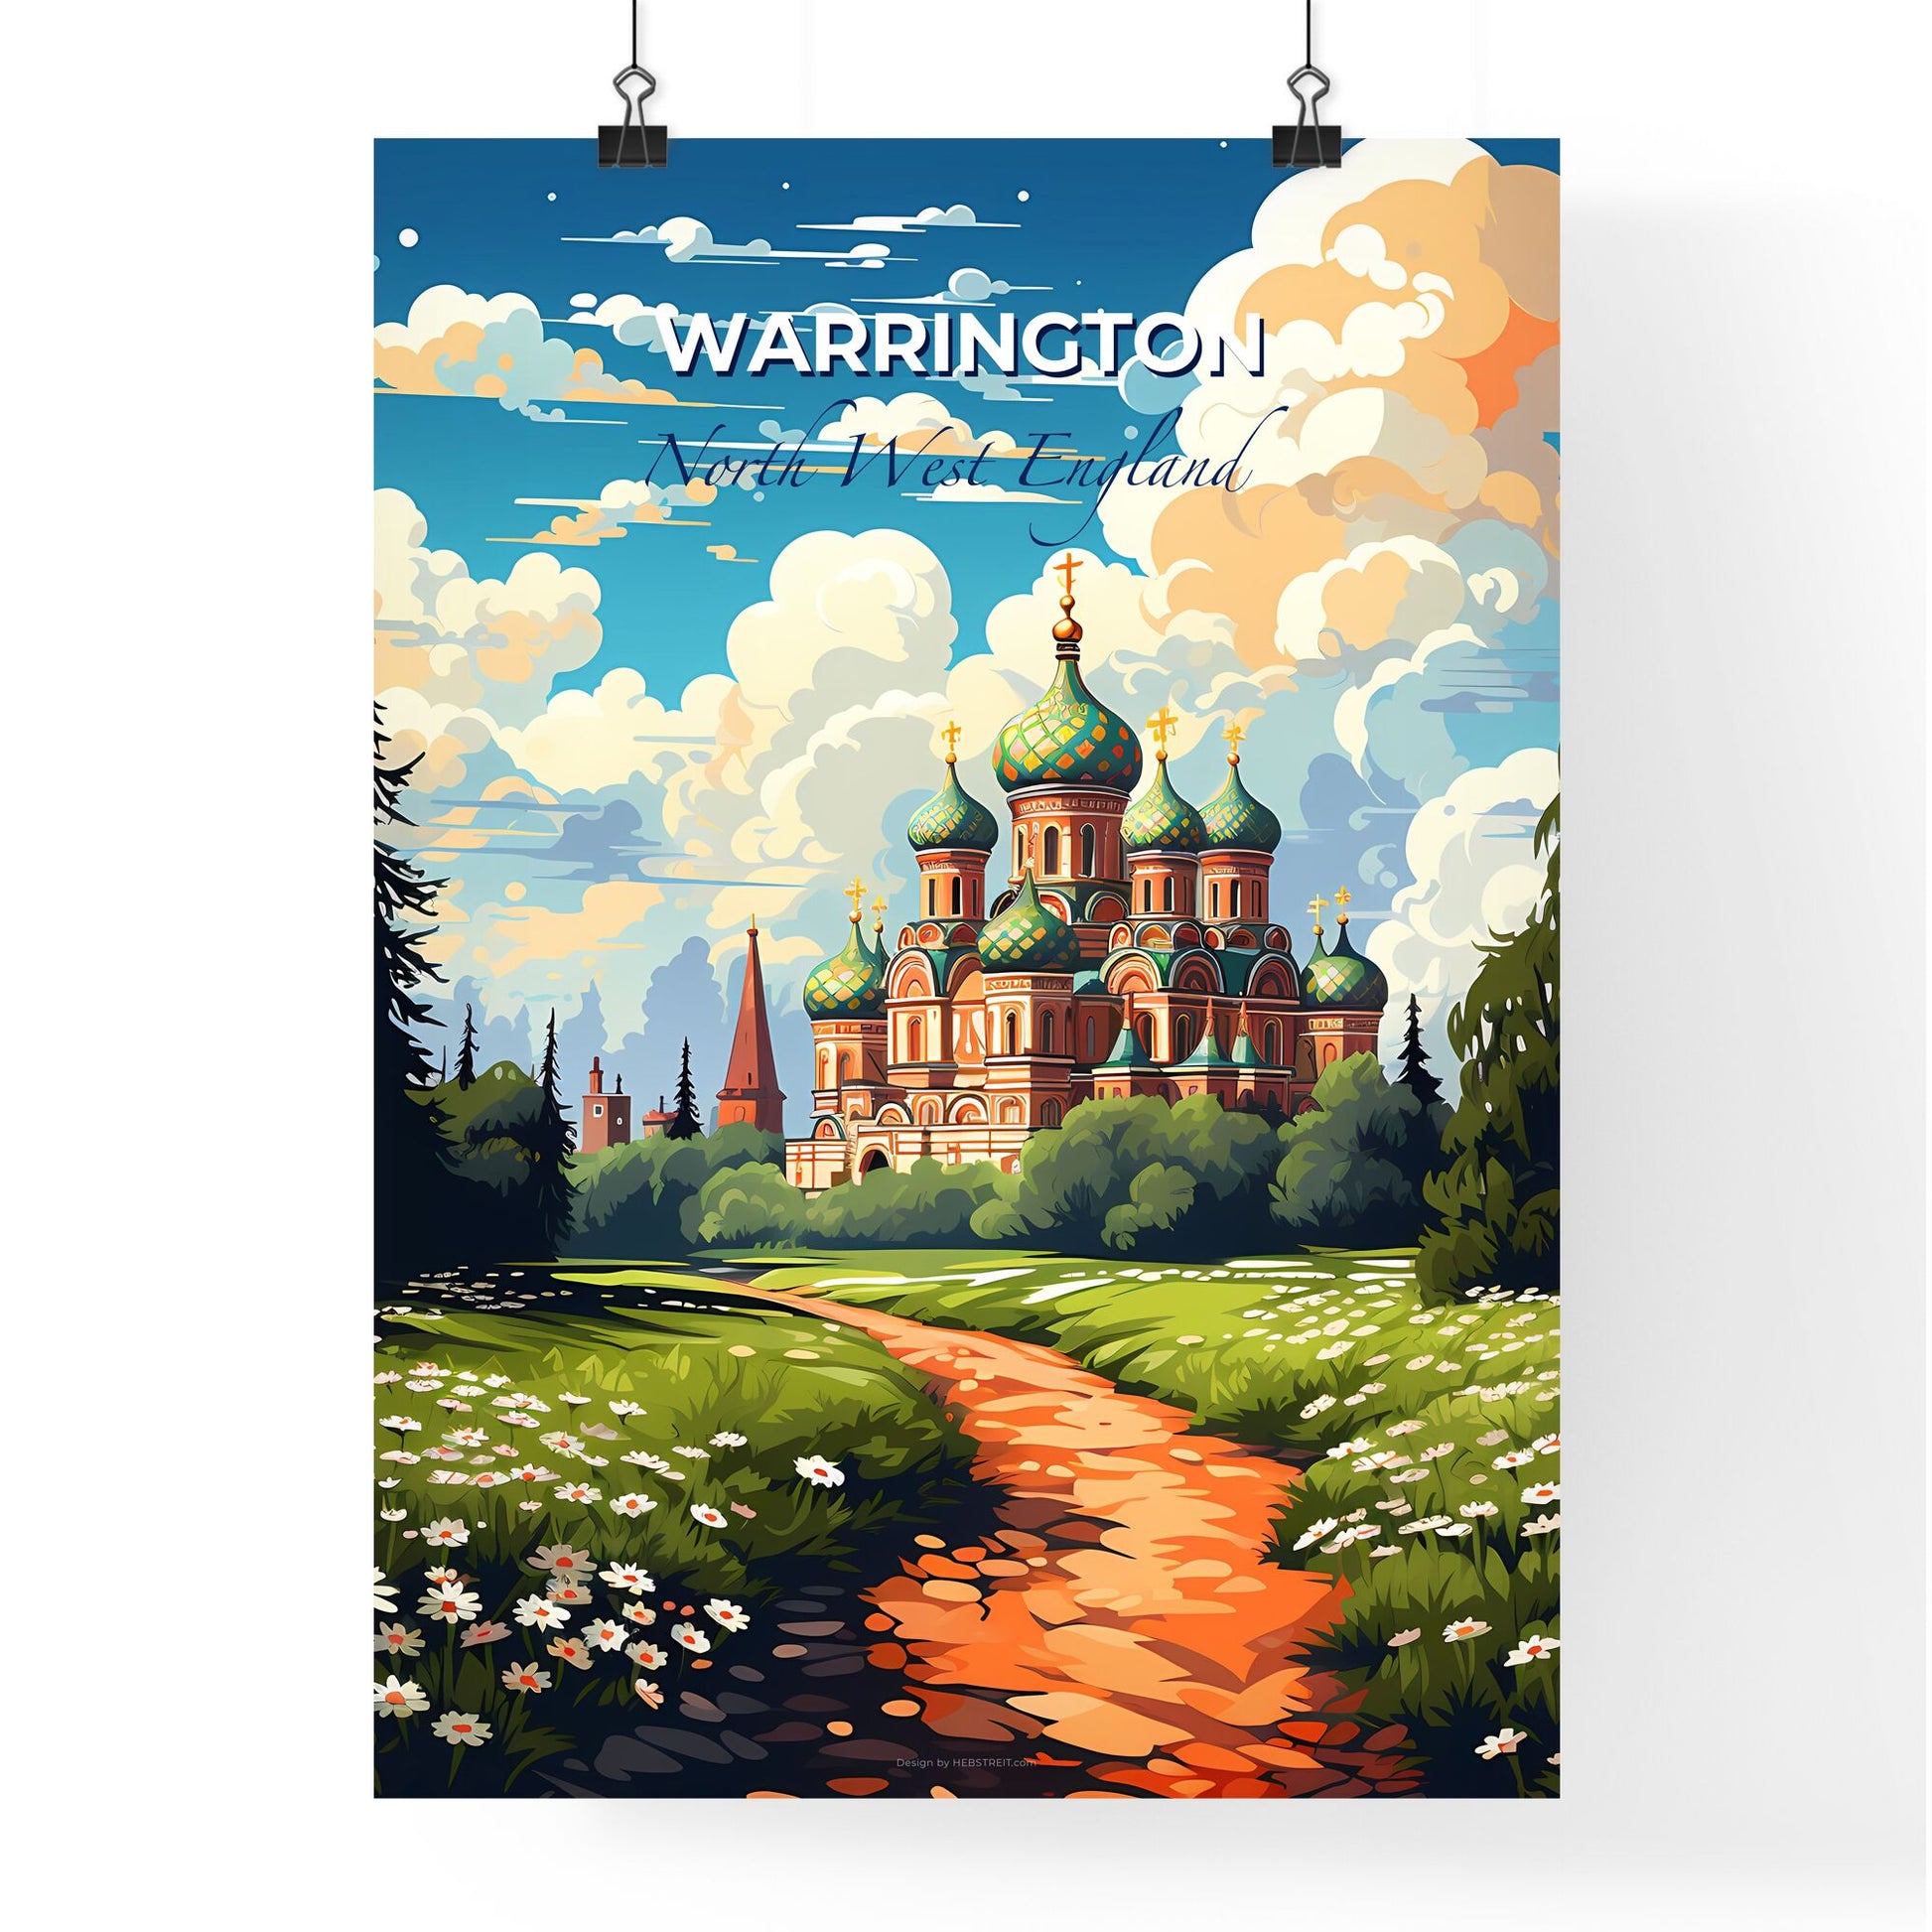 Warrington, North West England, A Poster of a painting of a building with trees and grass Default Title